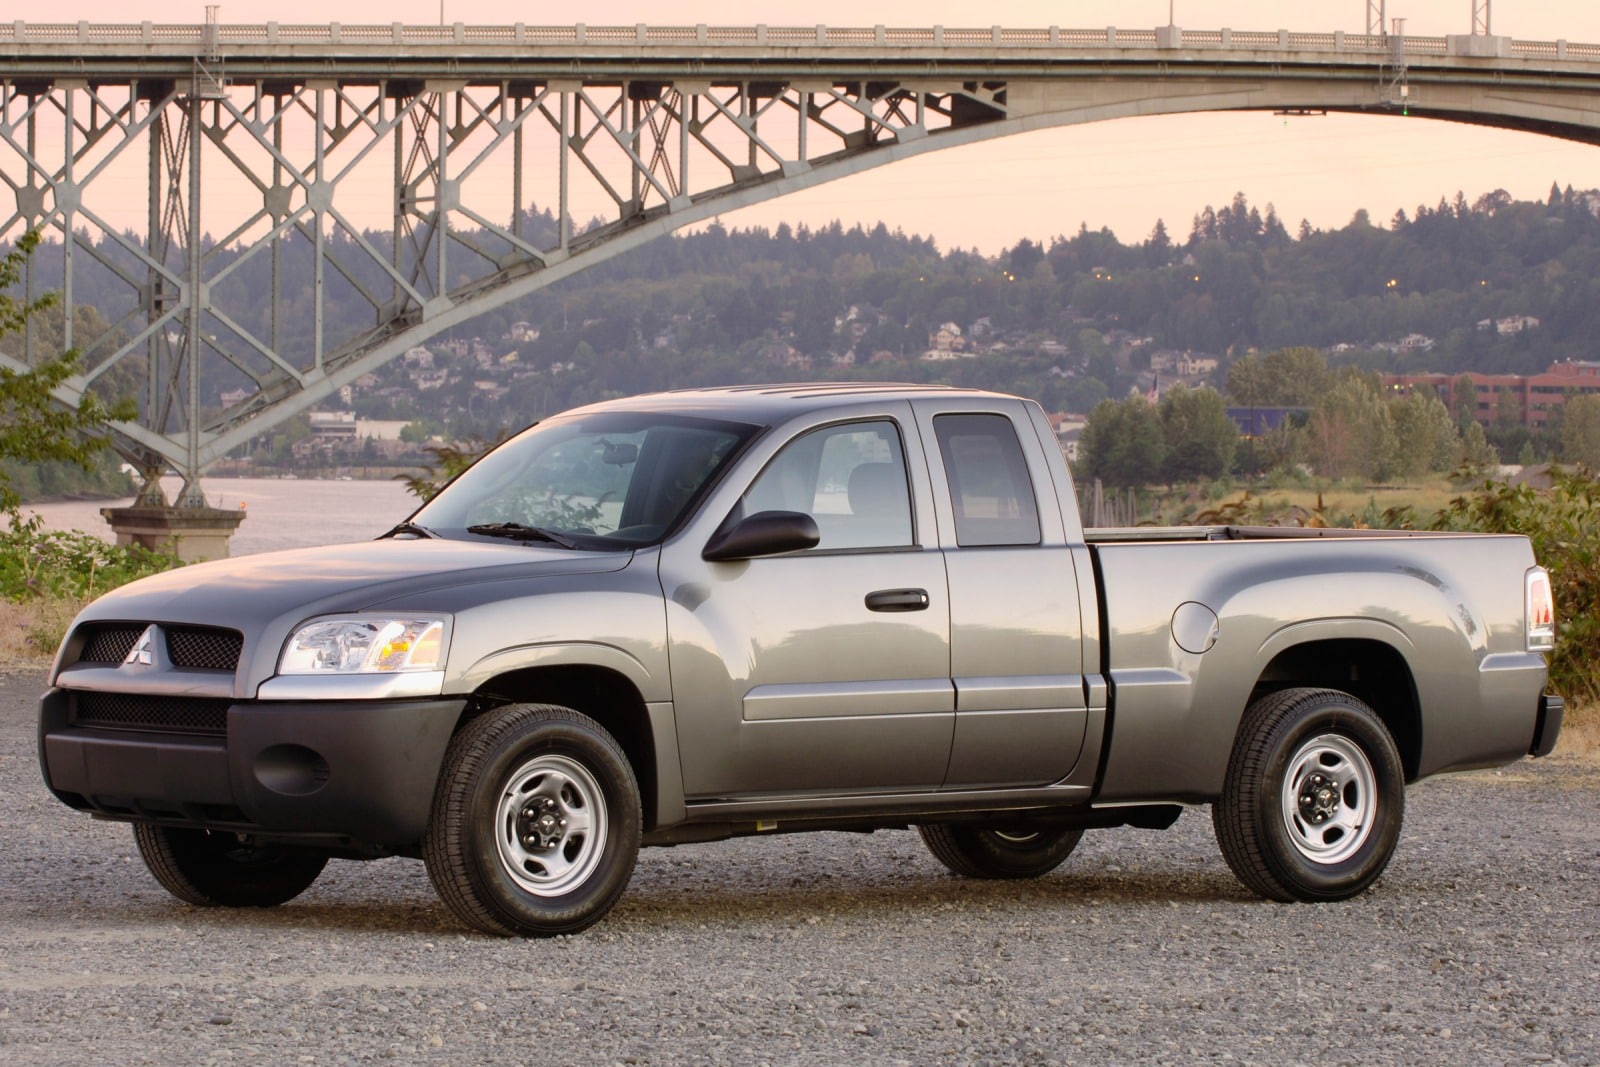 Used 2007 Mitsubishi Raider Extended Cab Review | Edmunds